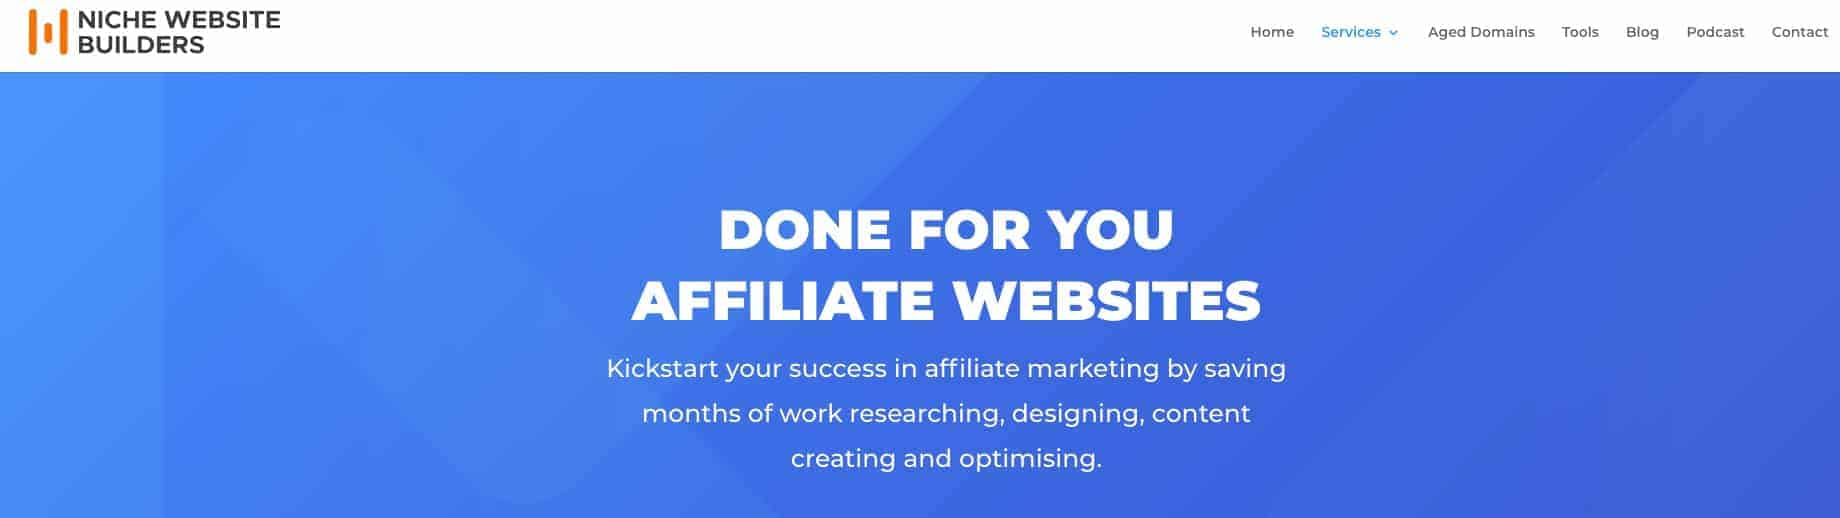 niche website builders done for your sites